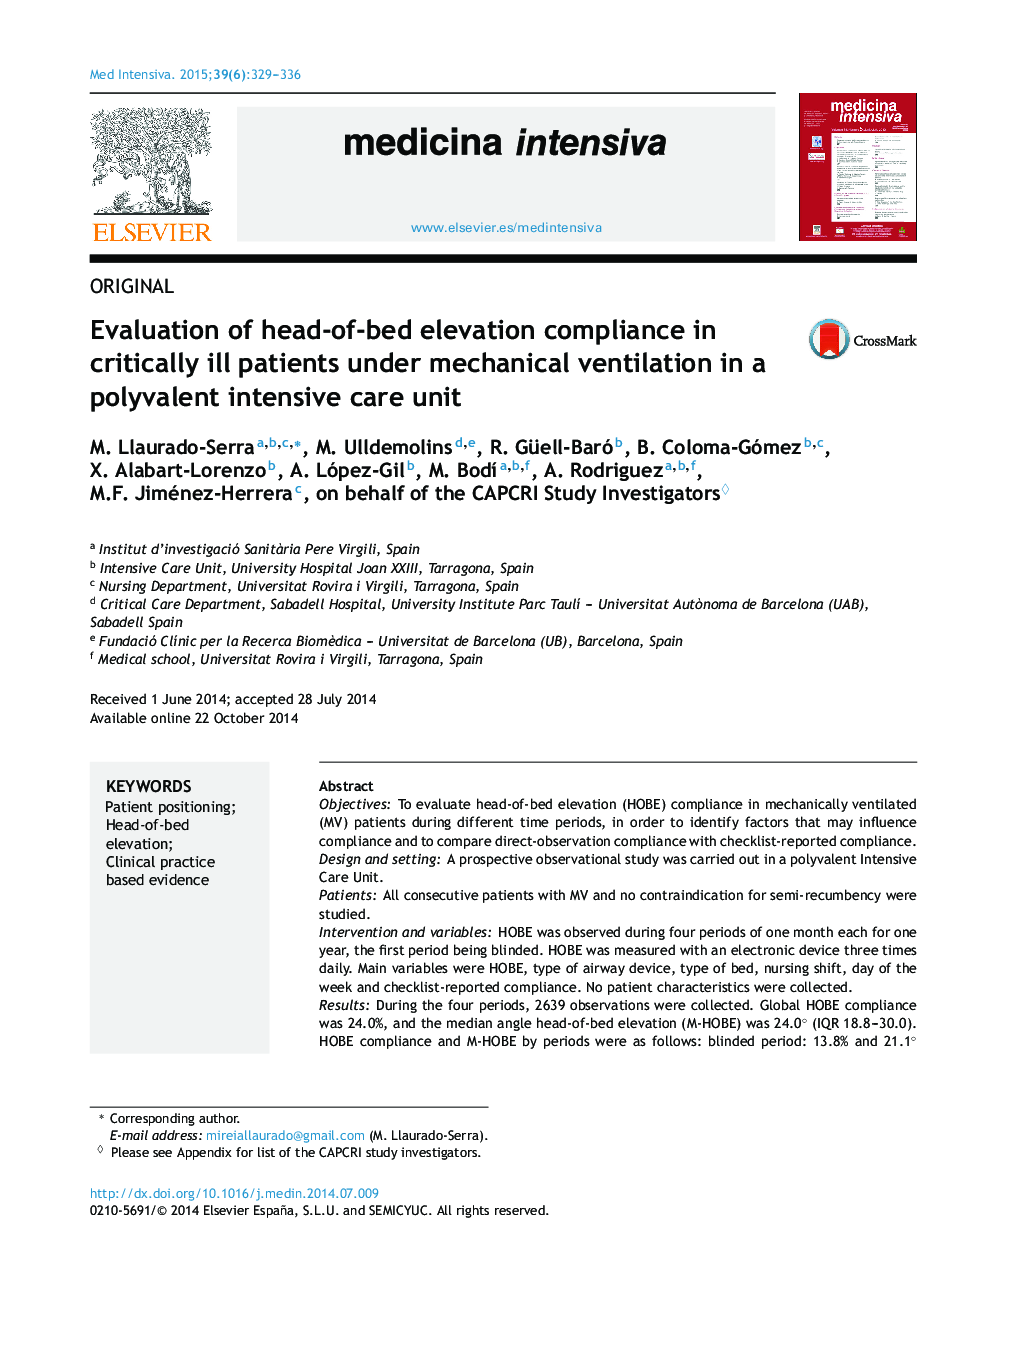 Evaluation of head-of-bed elevation compliance in critically ill patients under mechanical ventilation in a polyvalent intensive care unit